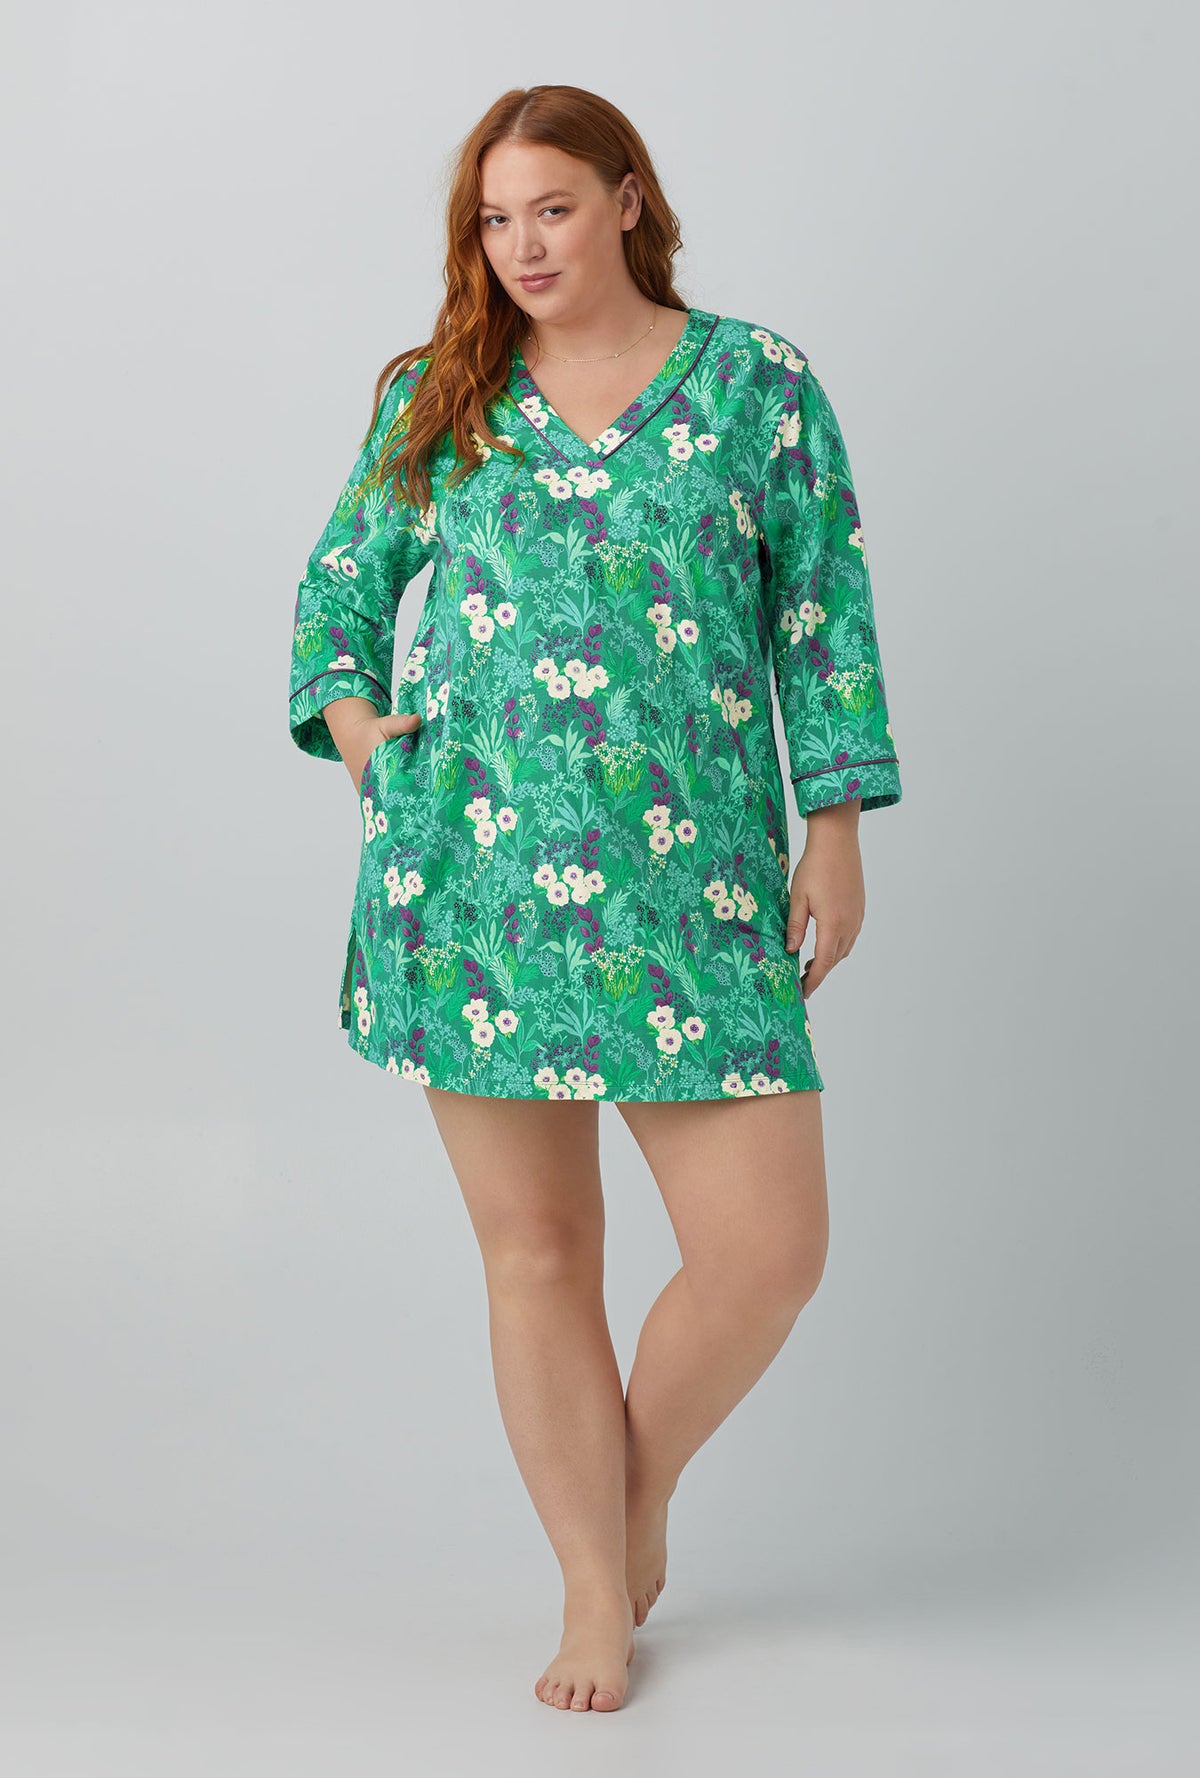 A lady wearing green 3/4 Sleeve Stretch Jersey Sleepshirt with Wintergreens print